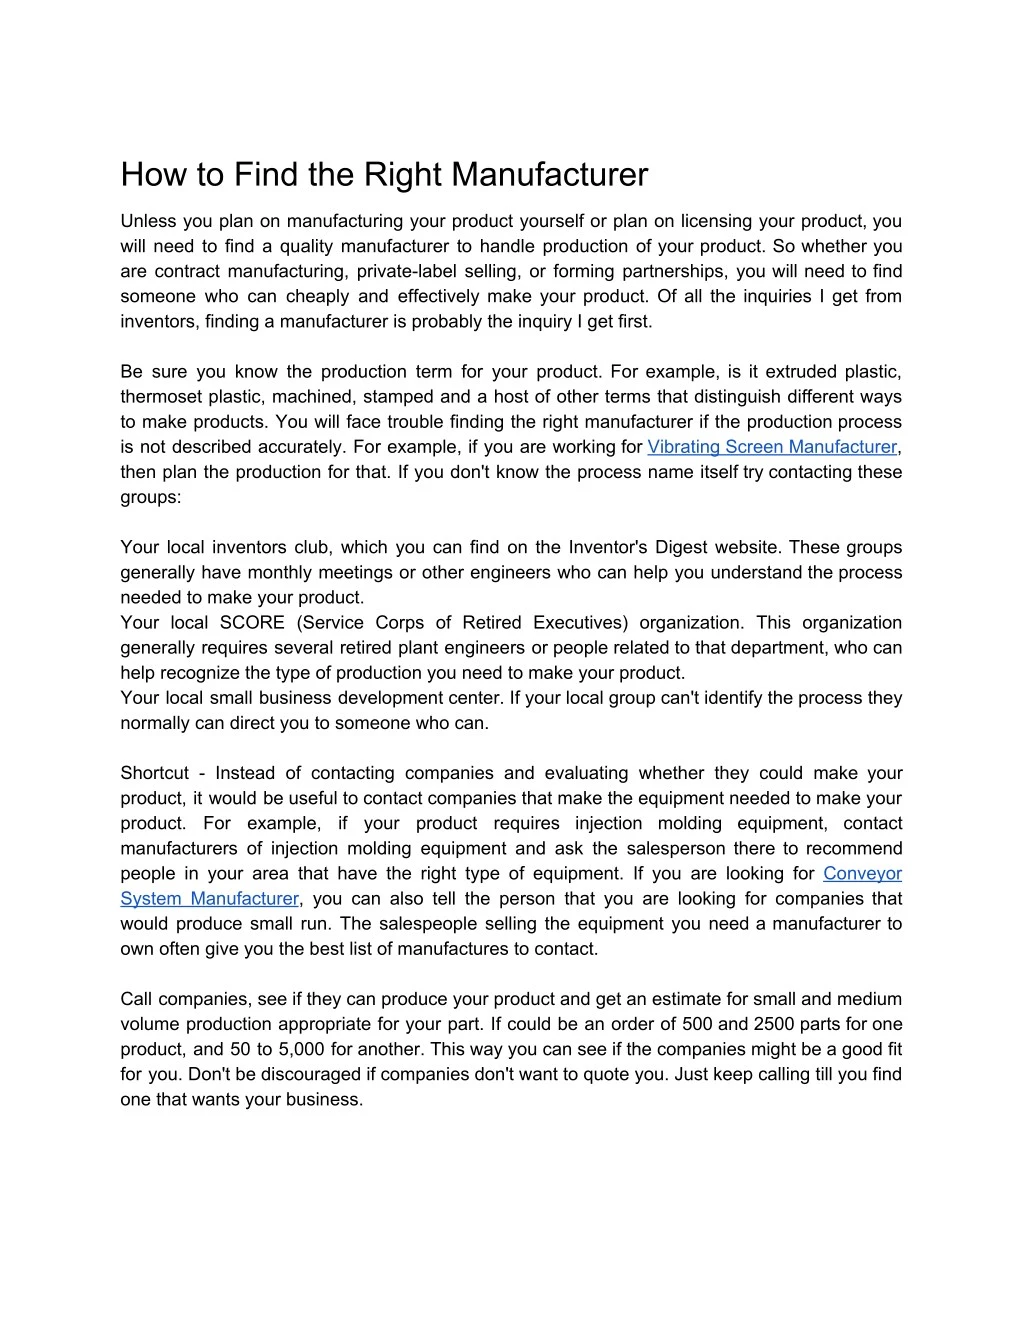 how to find the right manufacturer